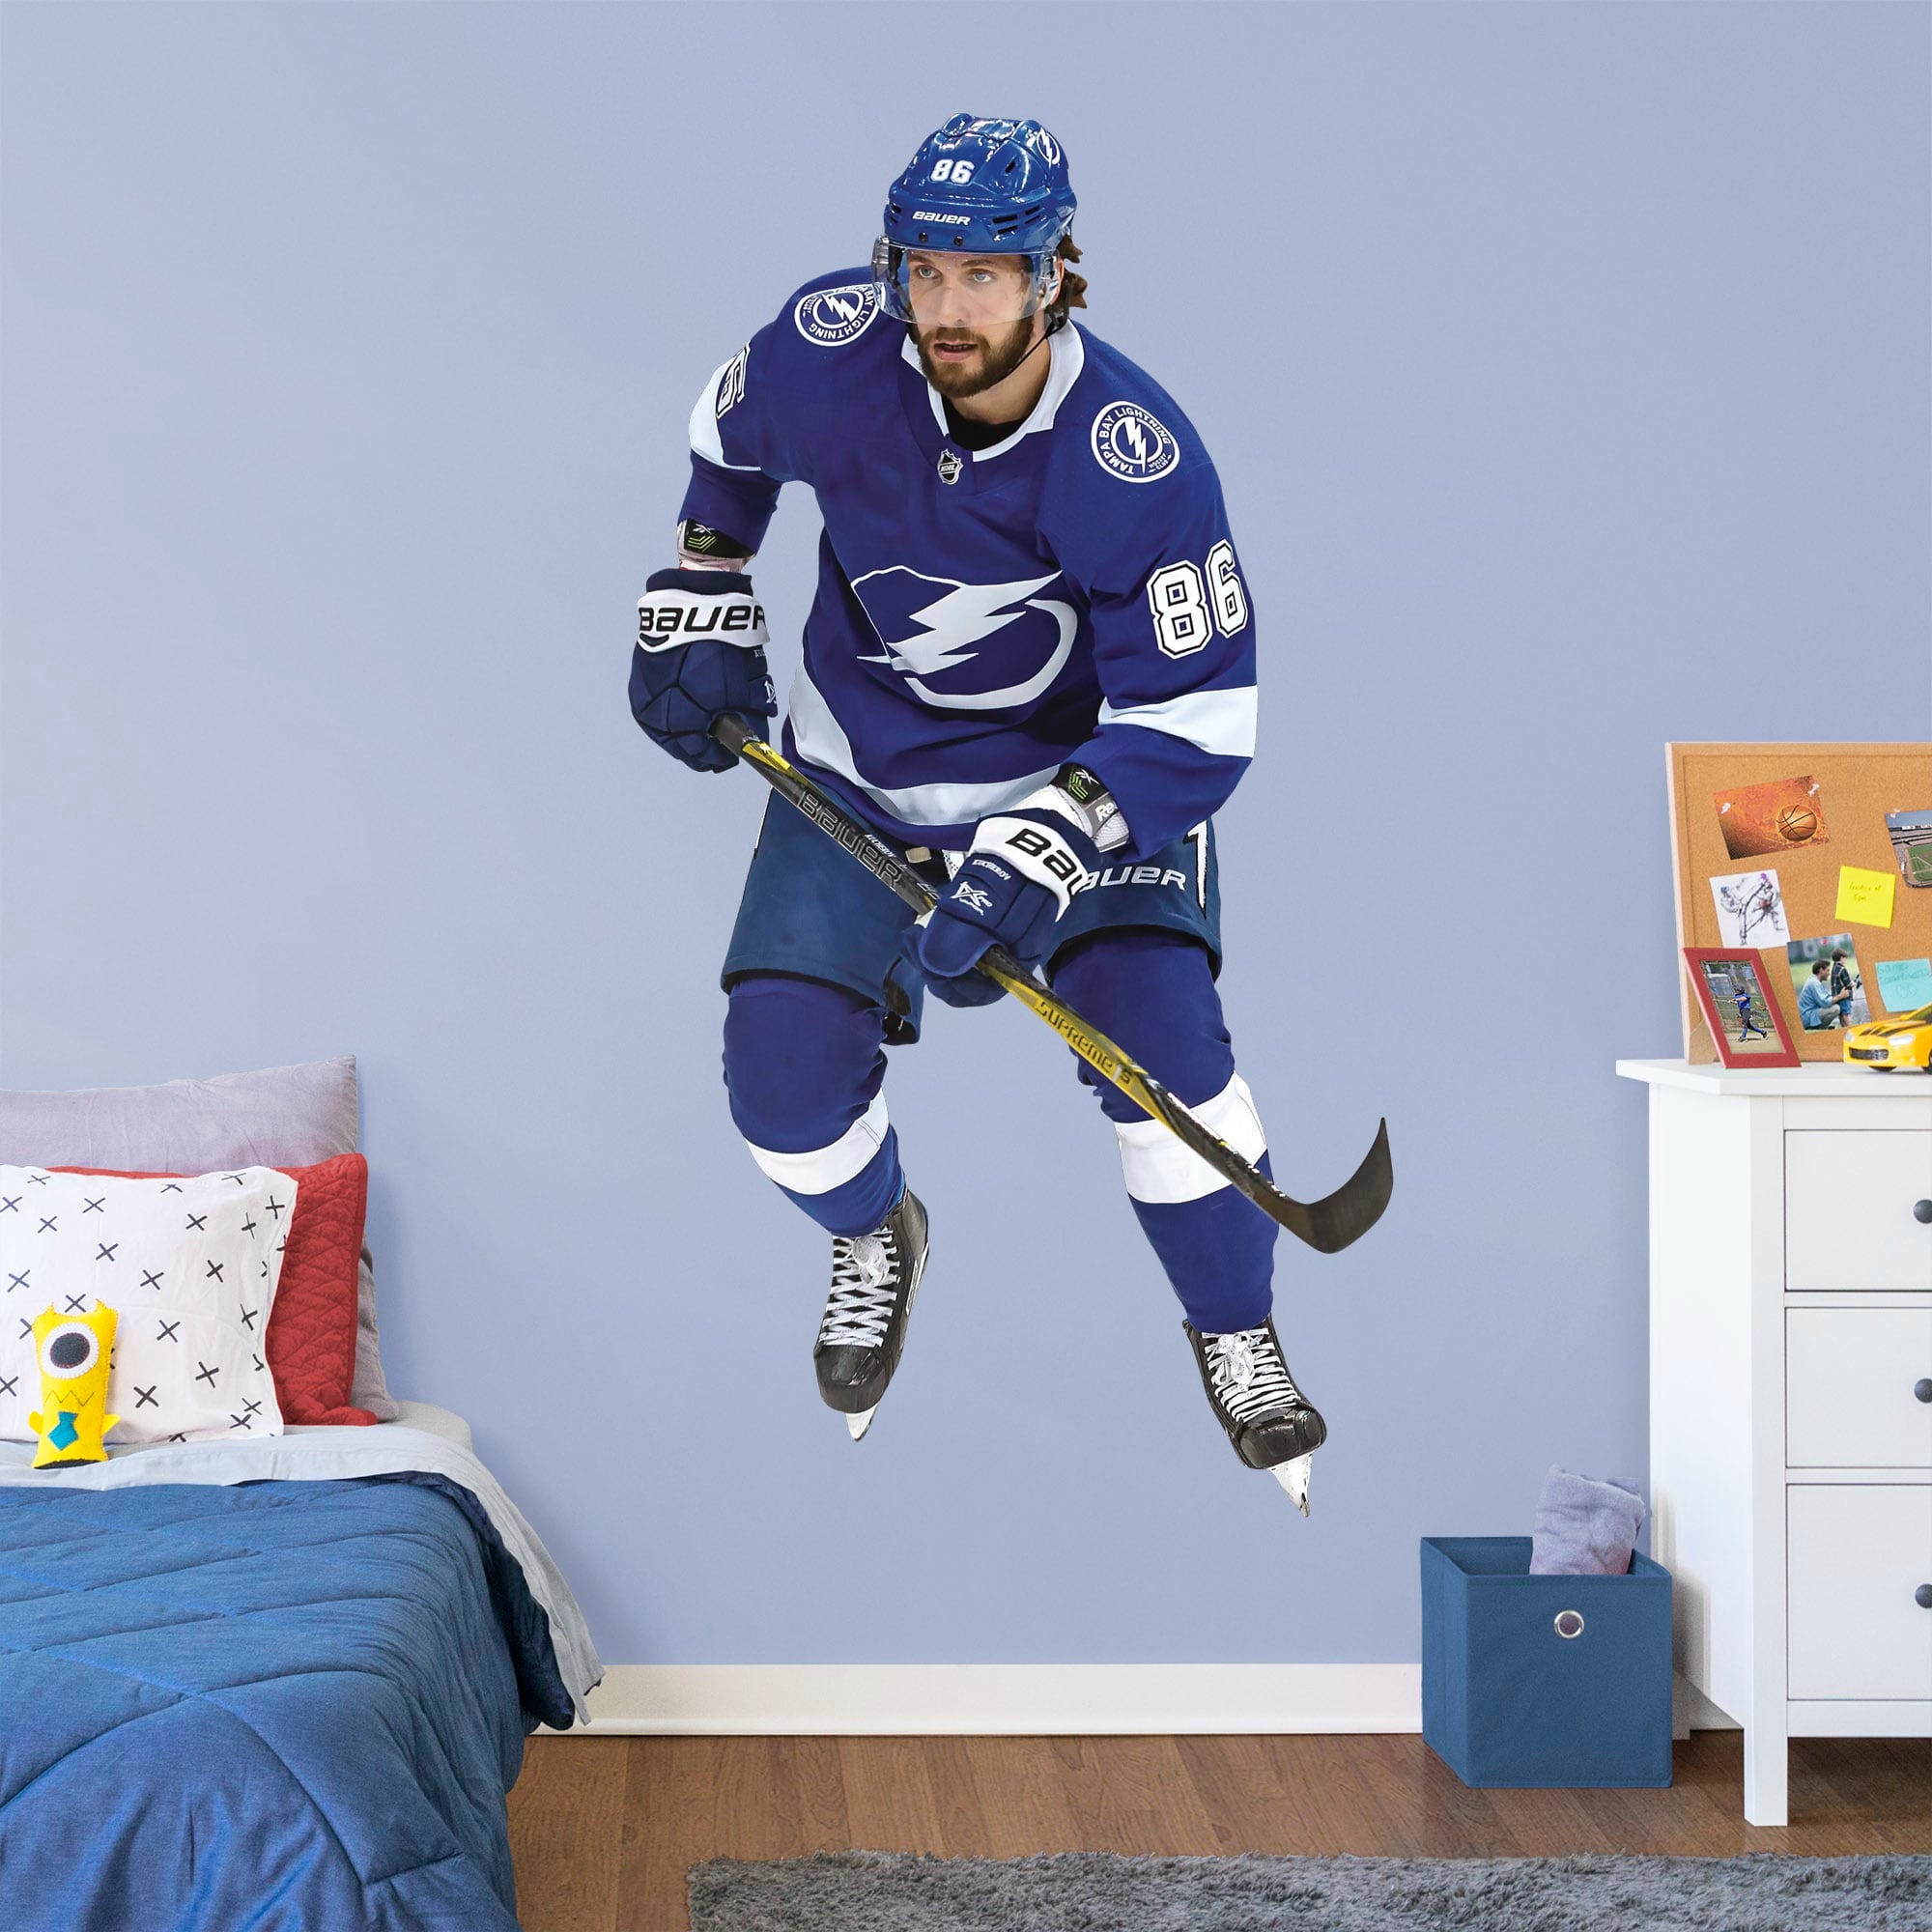 Nikita Kucherov for Tampa Bay Lightning - Officially Licensed NHL Removable Wall Decal Life-Size Athlete + 2 Decals (41"W x 76"H